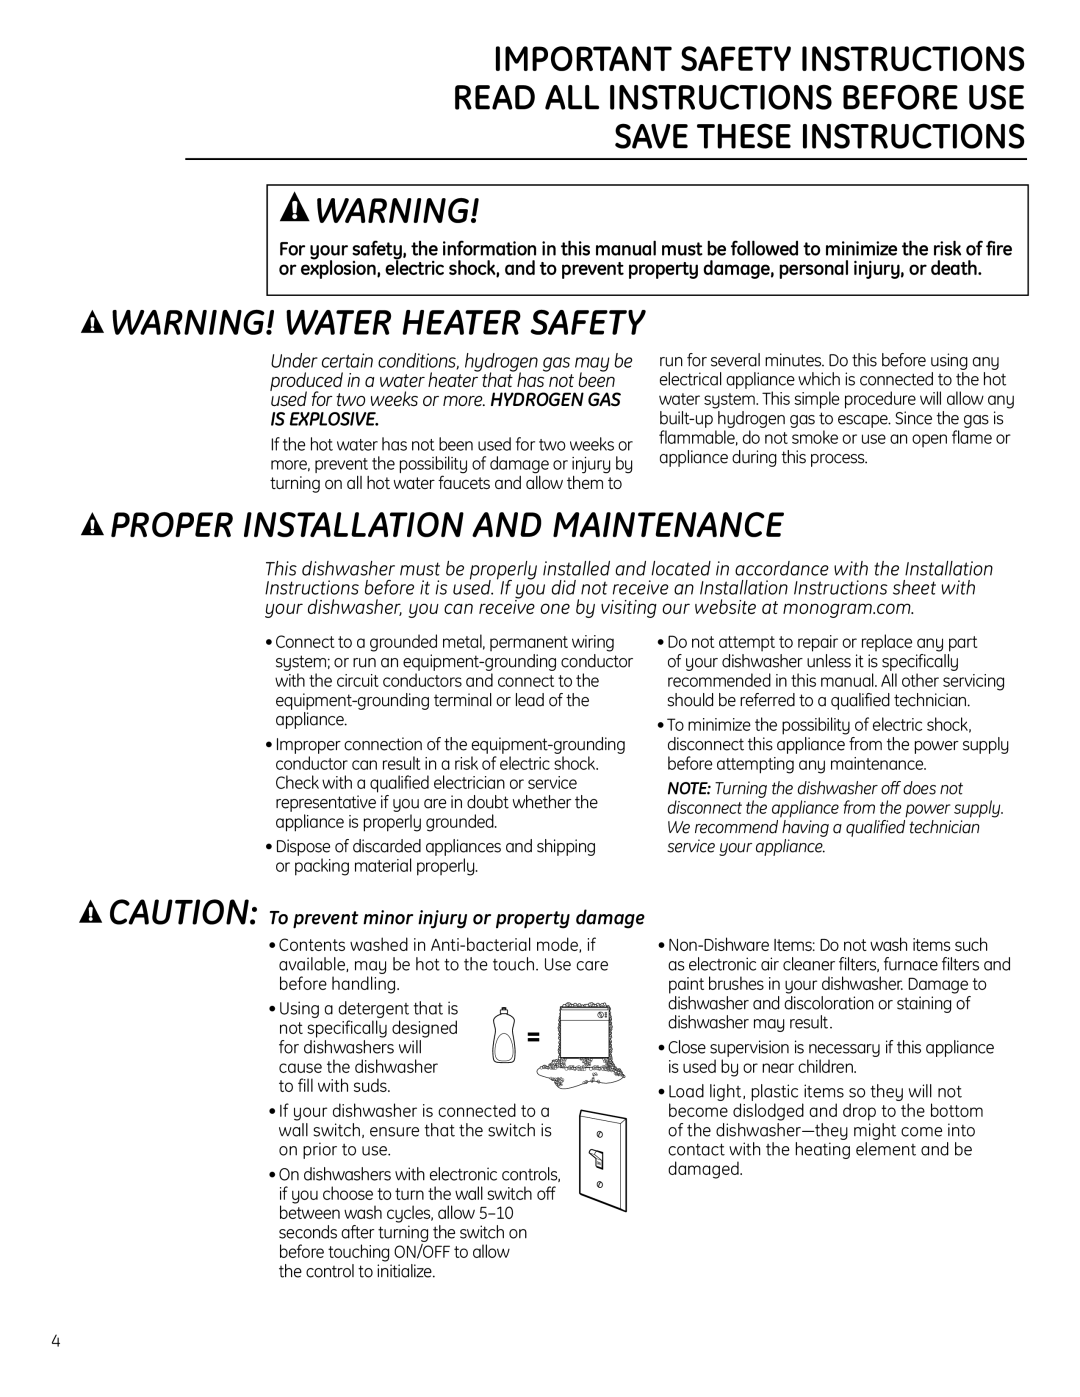 GE Monogram ZBD1850, ZBD1870 owner manual Proper Installation And Maintenance, Is Explosive, Warning! Water Heater Safety 